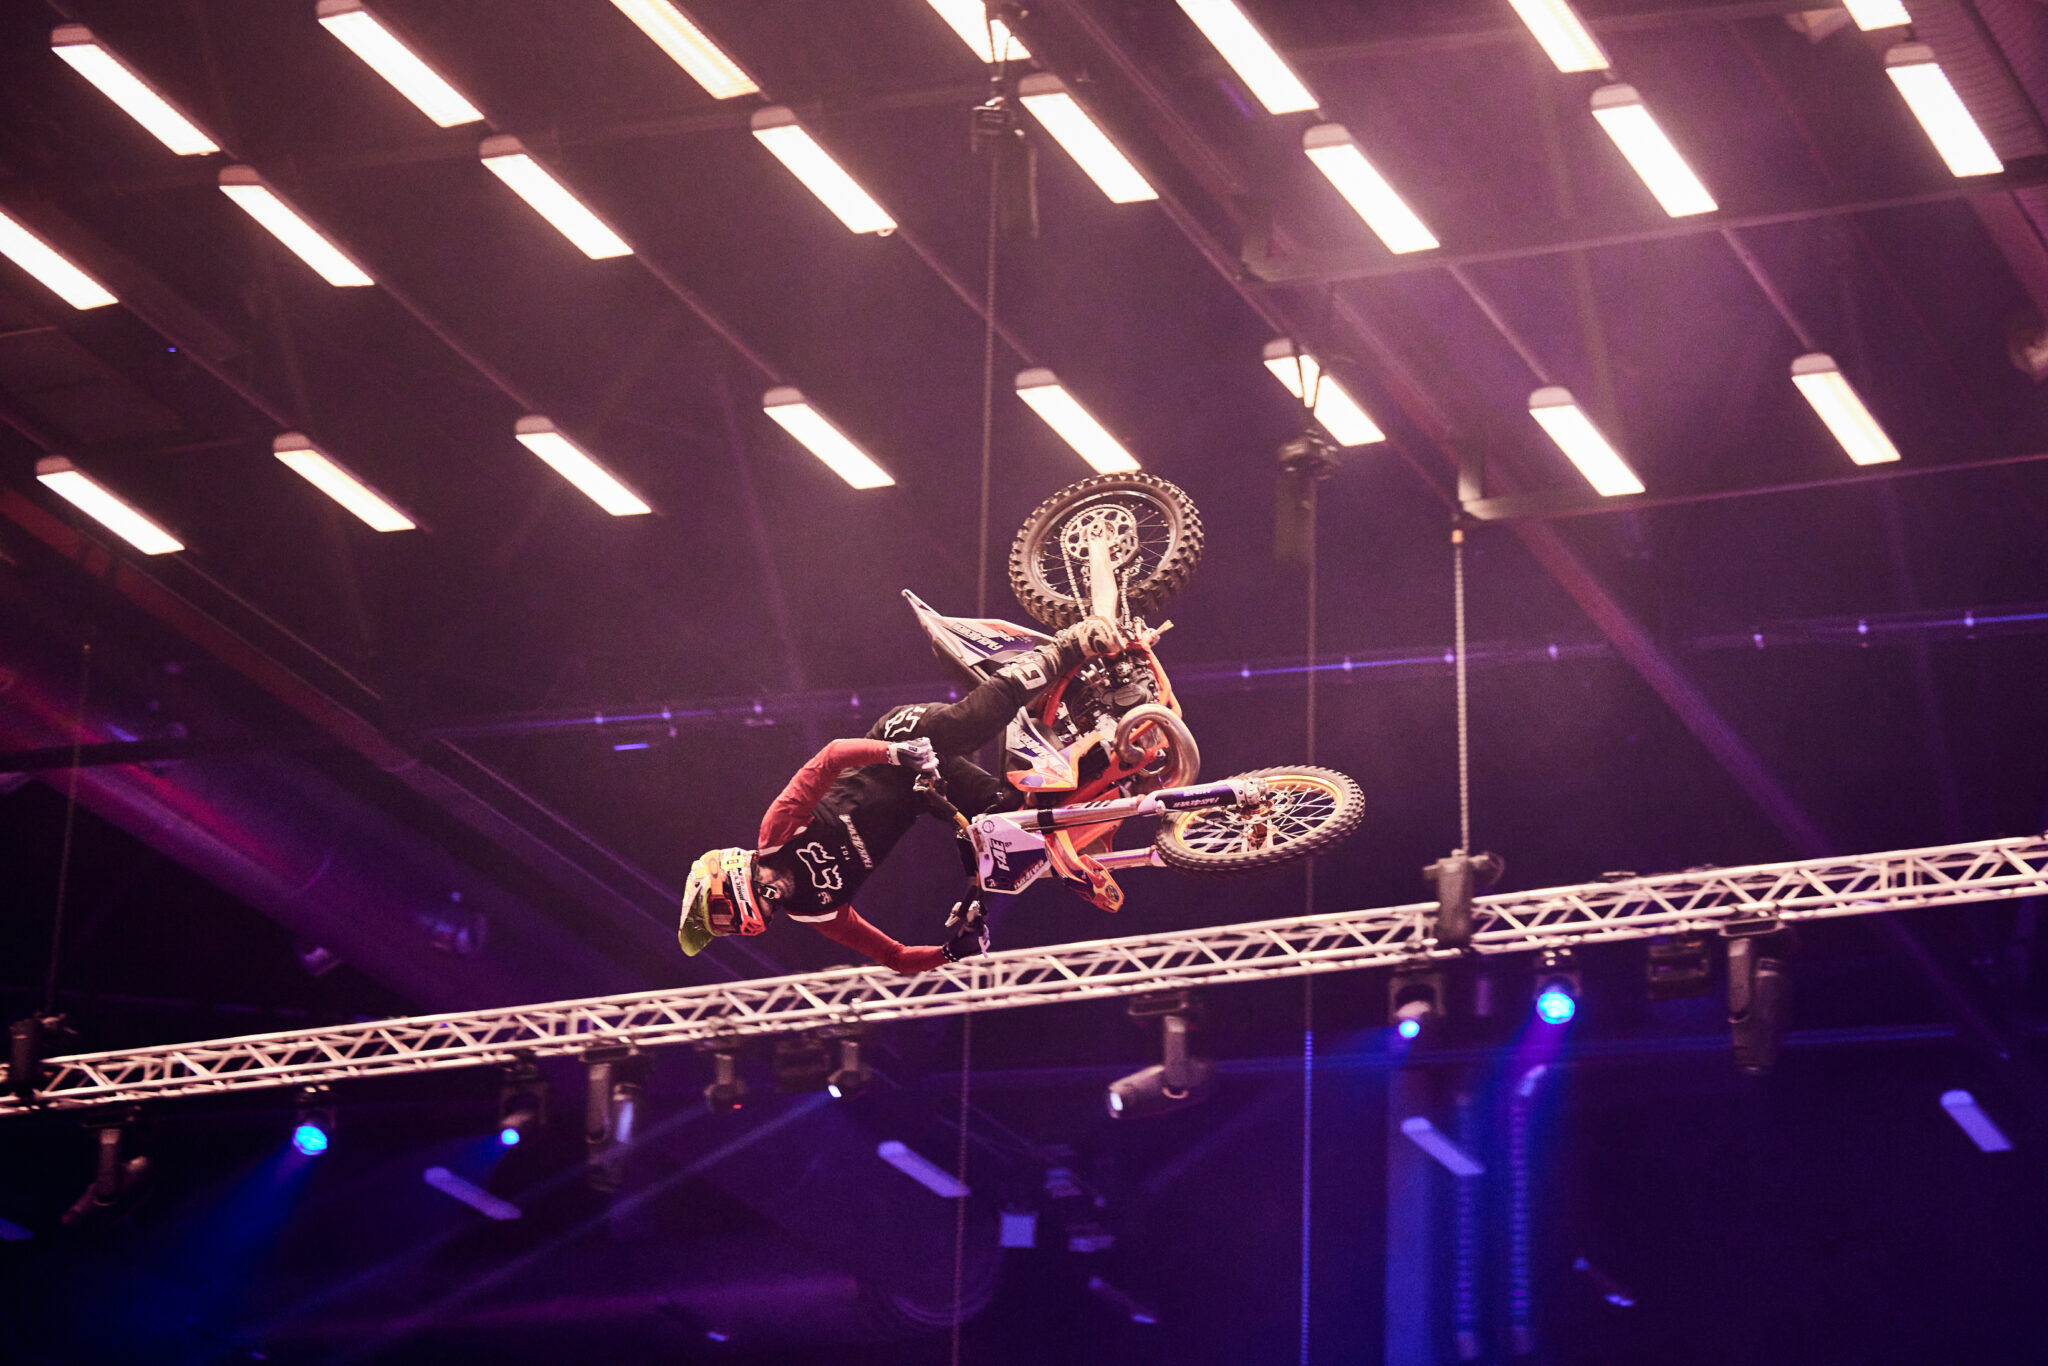 Freestyle action show til Supercross event i Herning - Fotograf Theis